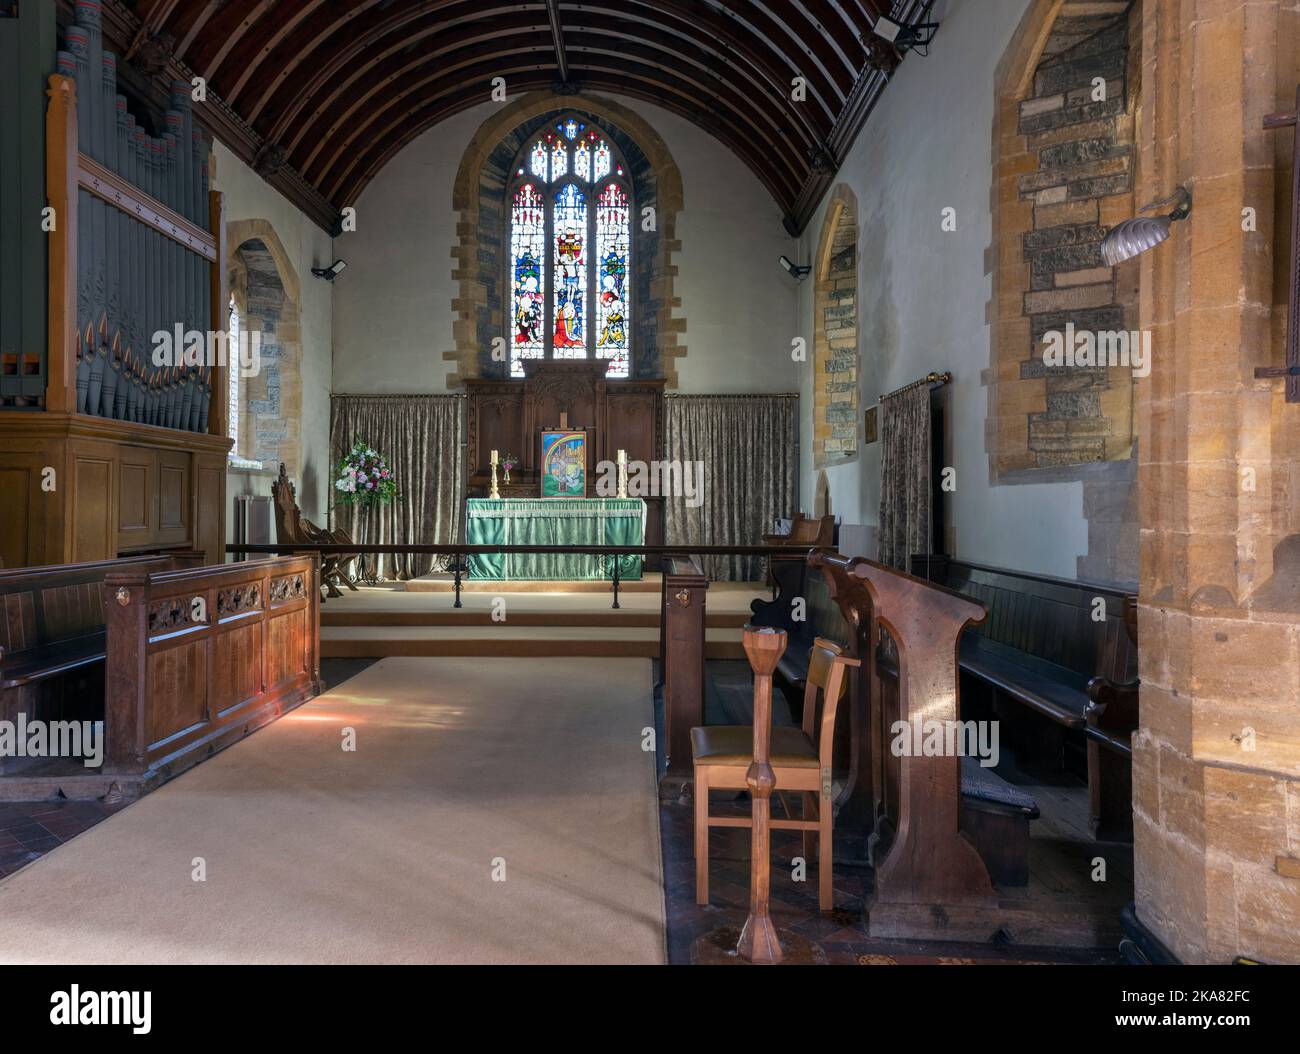 St Mary's Church, Huish Episcopi, Somerset, England, UK - grade I listed building - interior view of aisle and altar Stock Photo